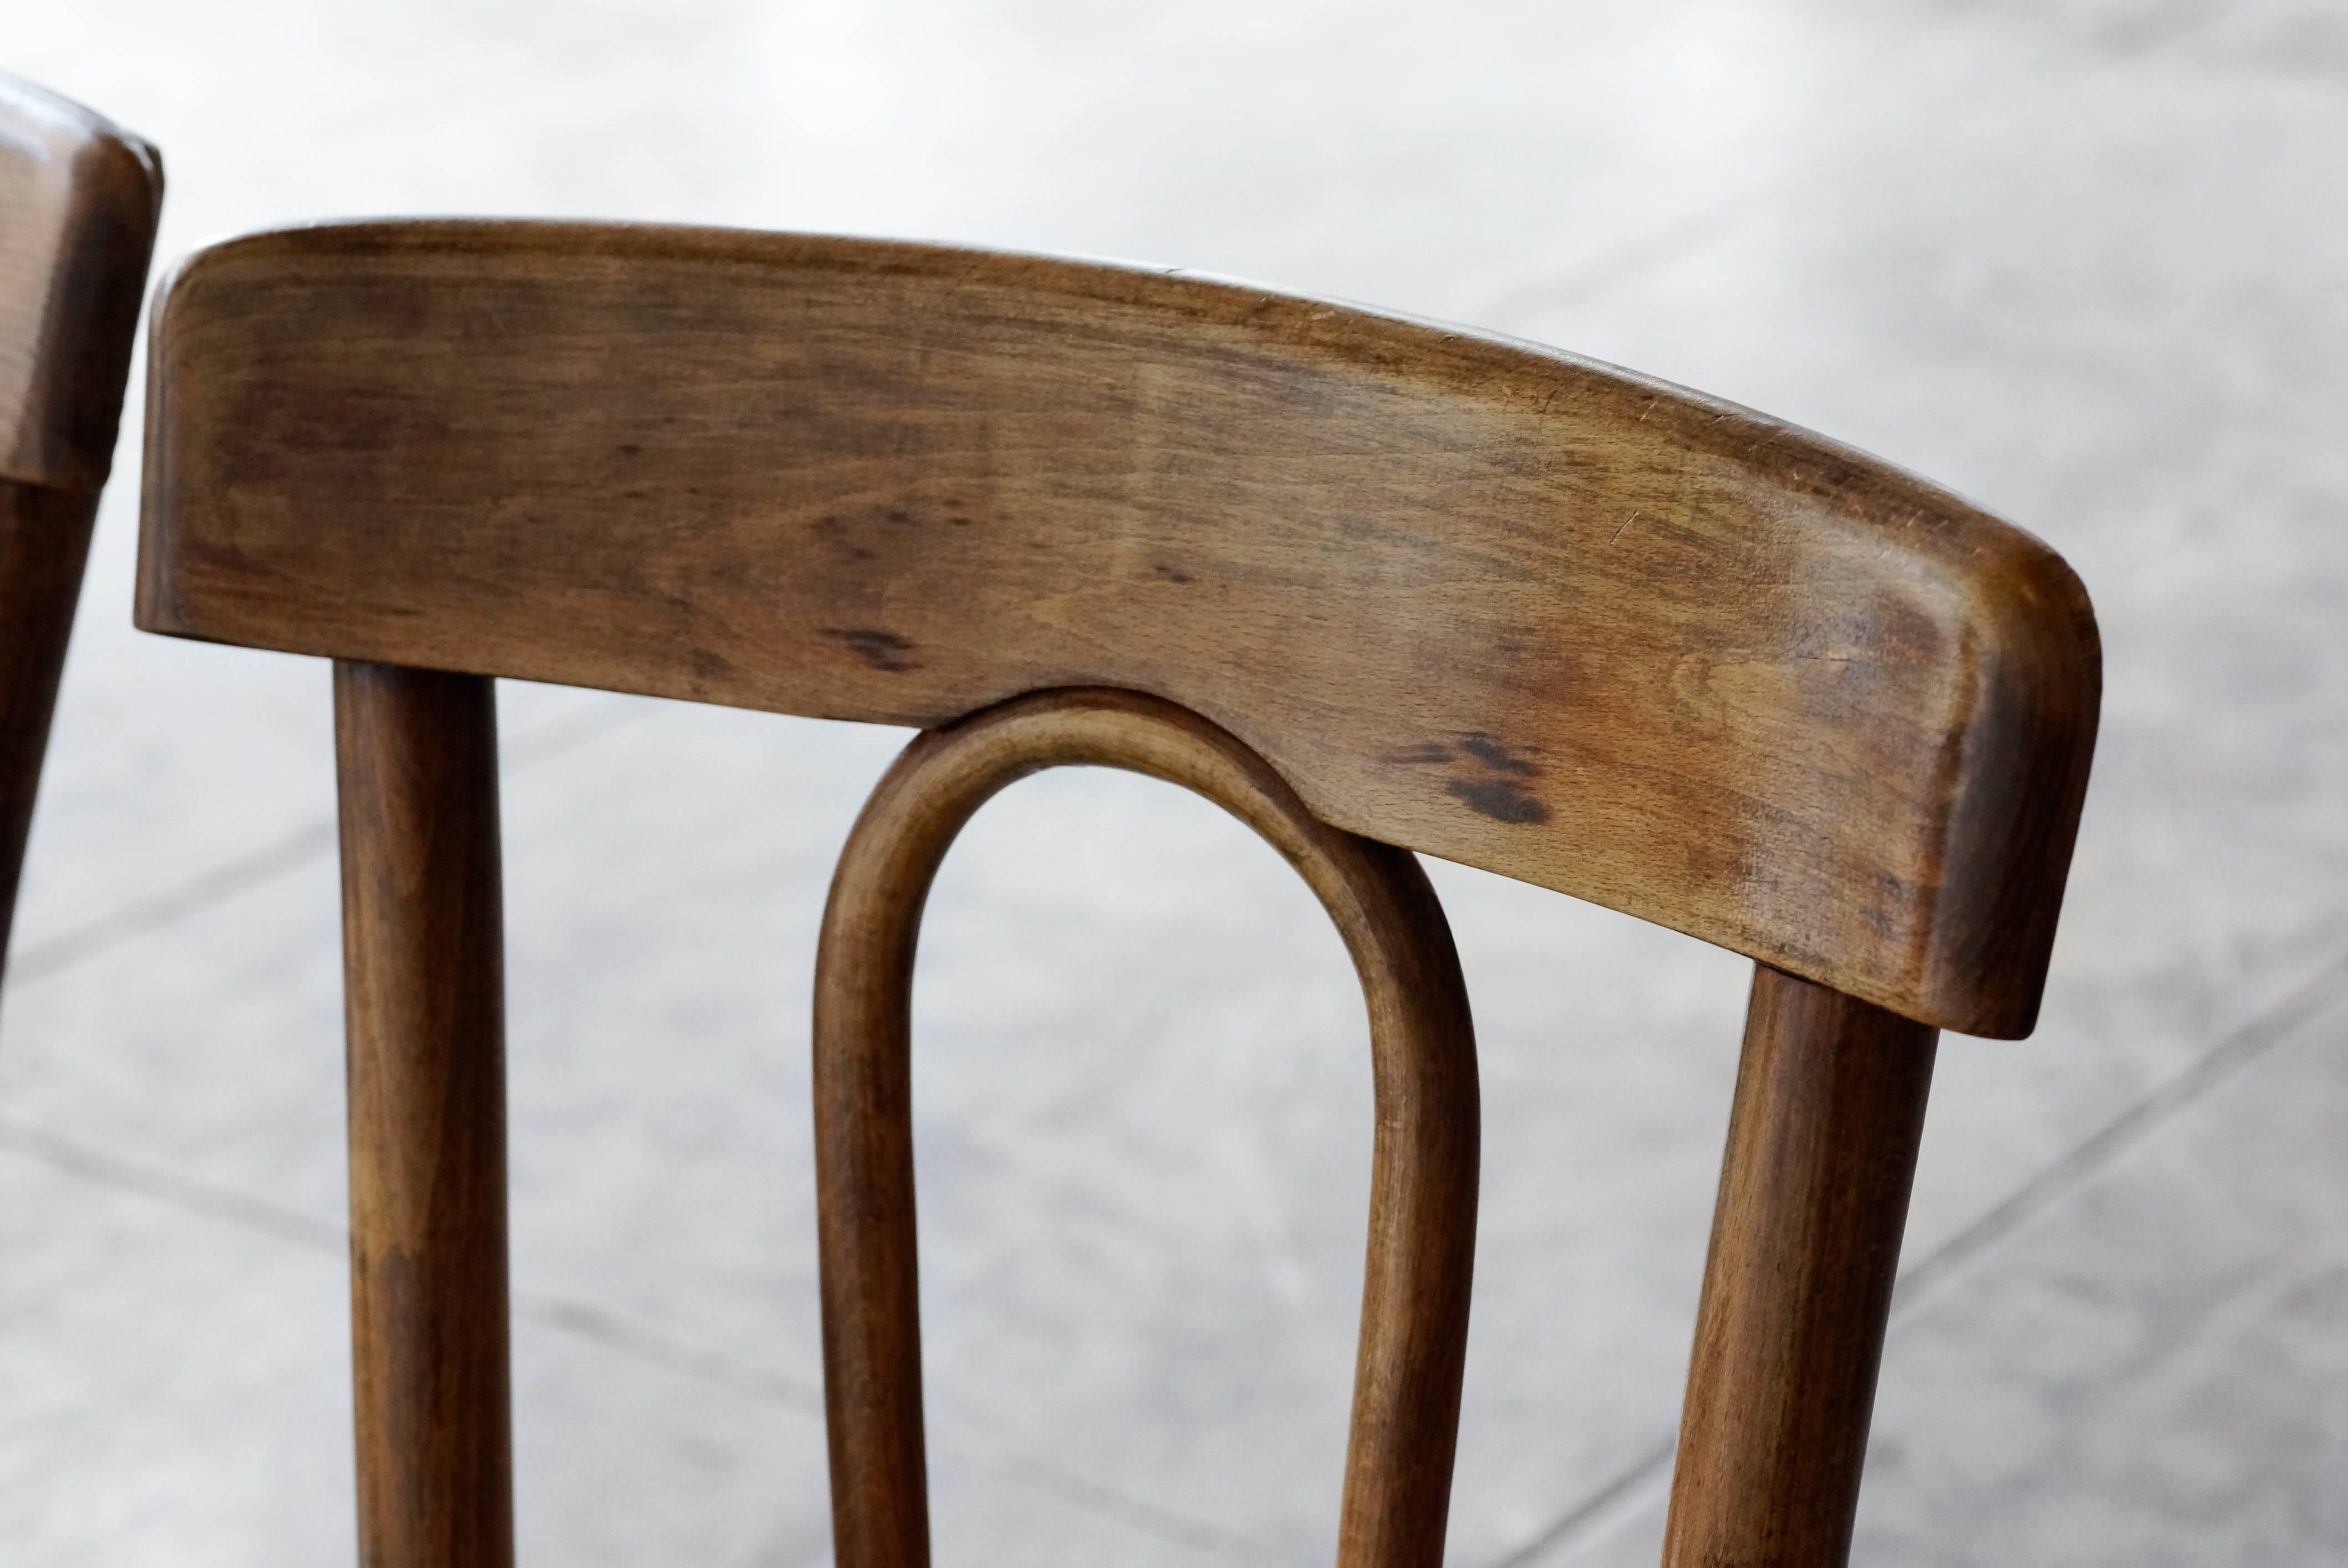 Classic Thonet bentwood bistro chairs. This early set (c. late 1800s) is rarely seen Thonet style. Features unique headrest and beautifully patterned seat. Recondition wood shows gentle signs of wear. Stamped Thonet/ Made in Poland.

Dimensions: